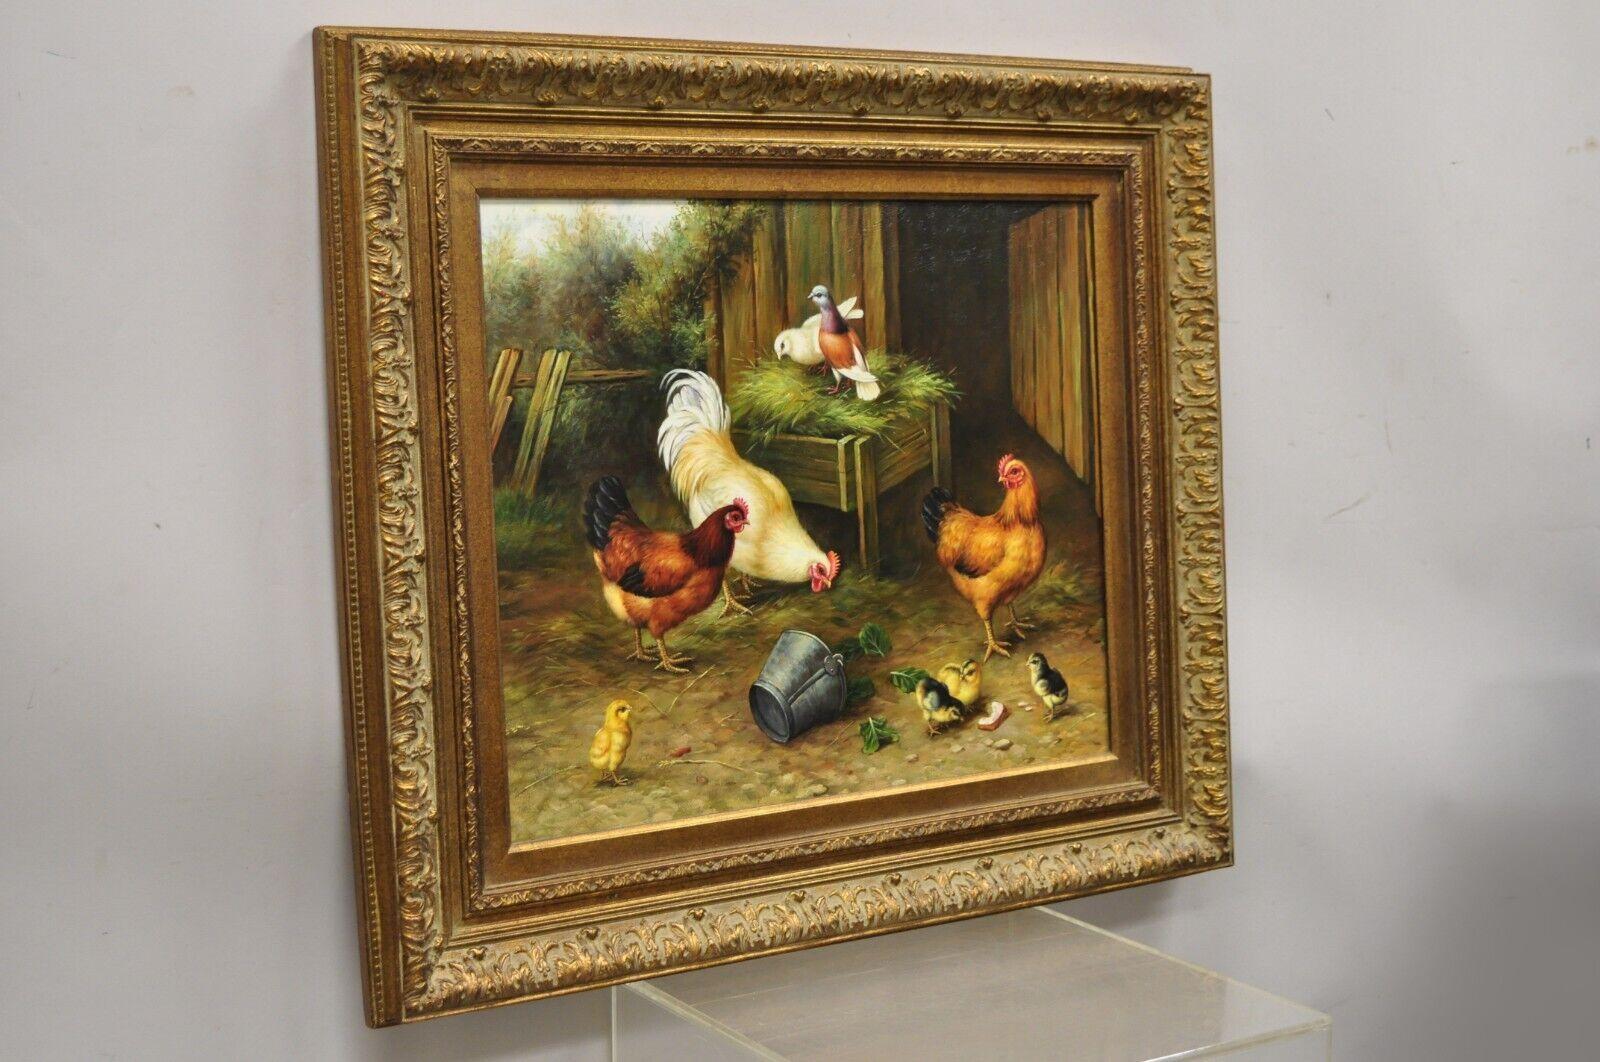 Oil on Canvas Decorator Painting of Farm Hens and Baby Chicks - Gold Frame. Item features oil on canvas, carved wood frame, farm scene of hens and baby chicks, unmarked. Circa Late 20th Century. Measurements: 29